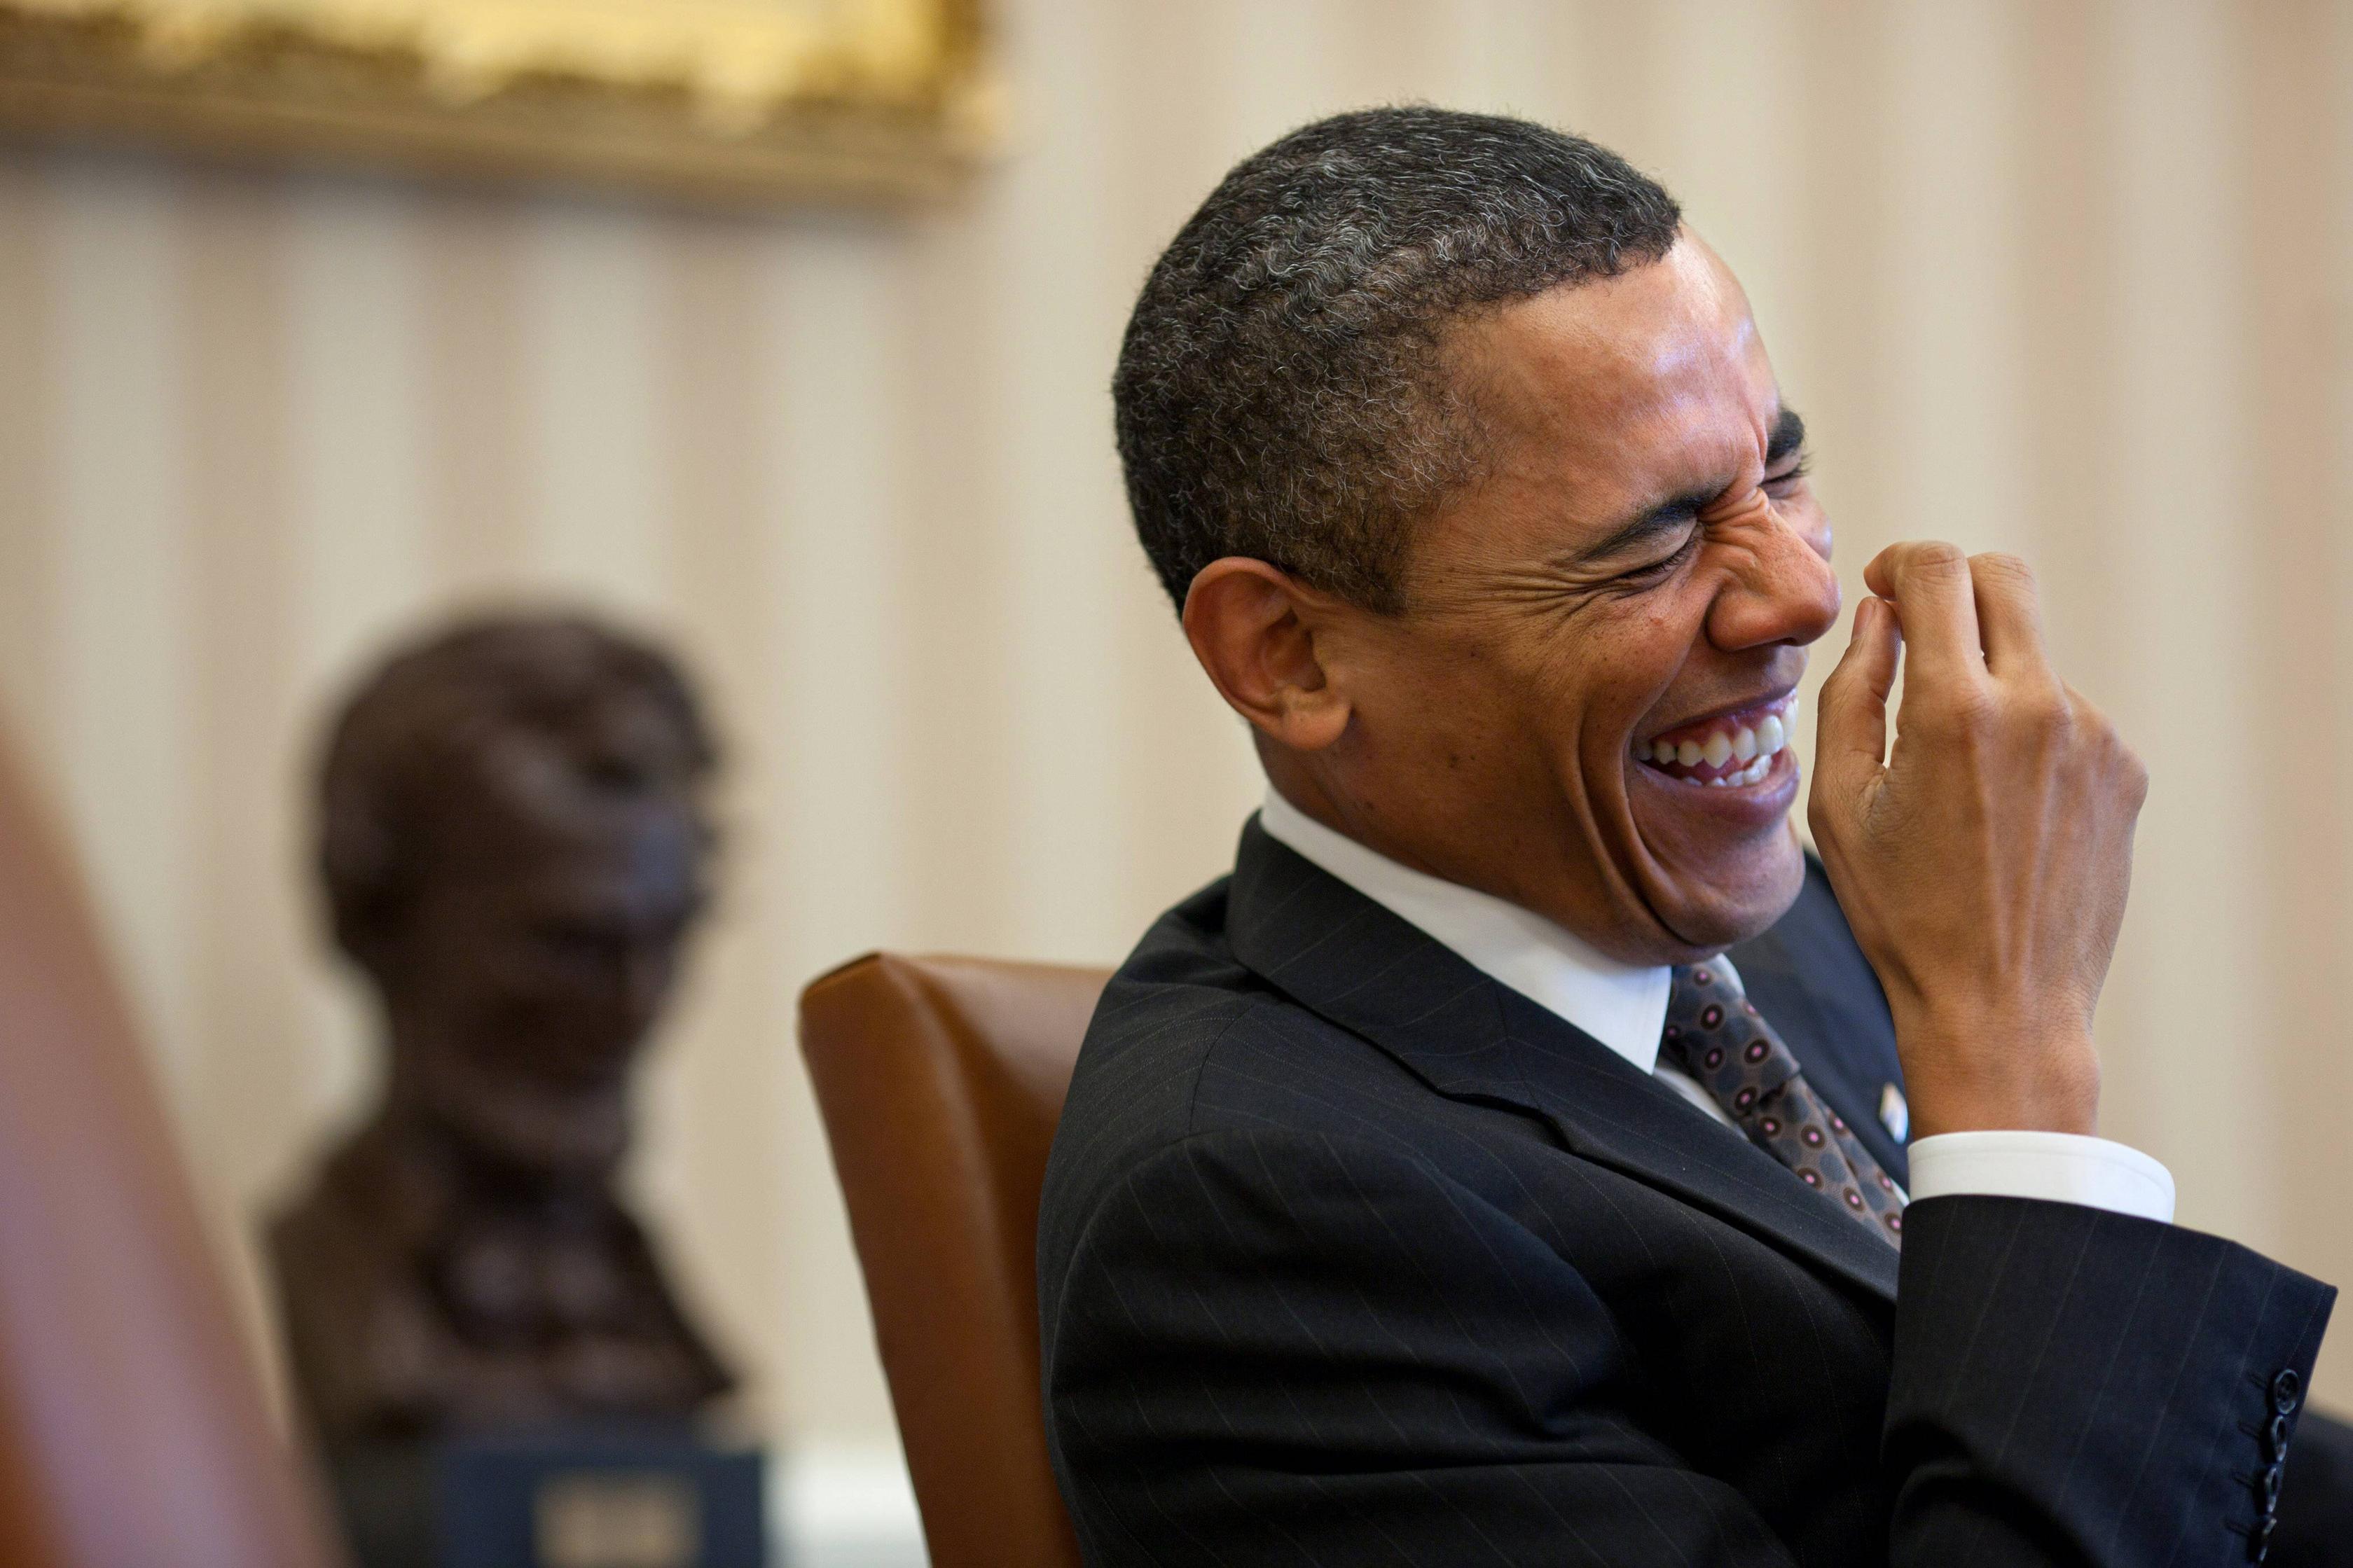 Obama and His “Usual Stuff”: Jokes About Finding Replacement for Justice Scalia